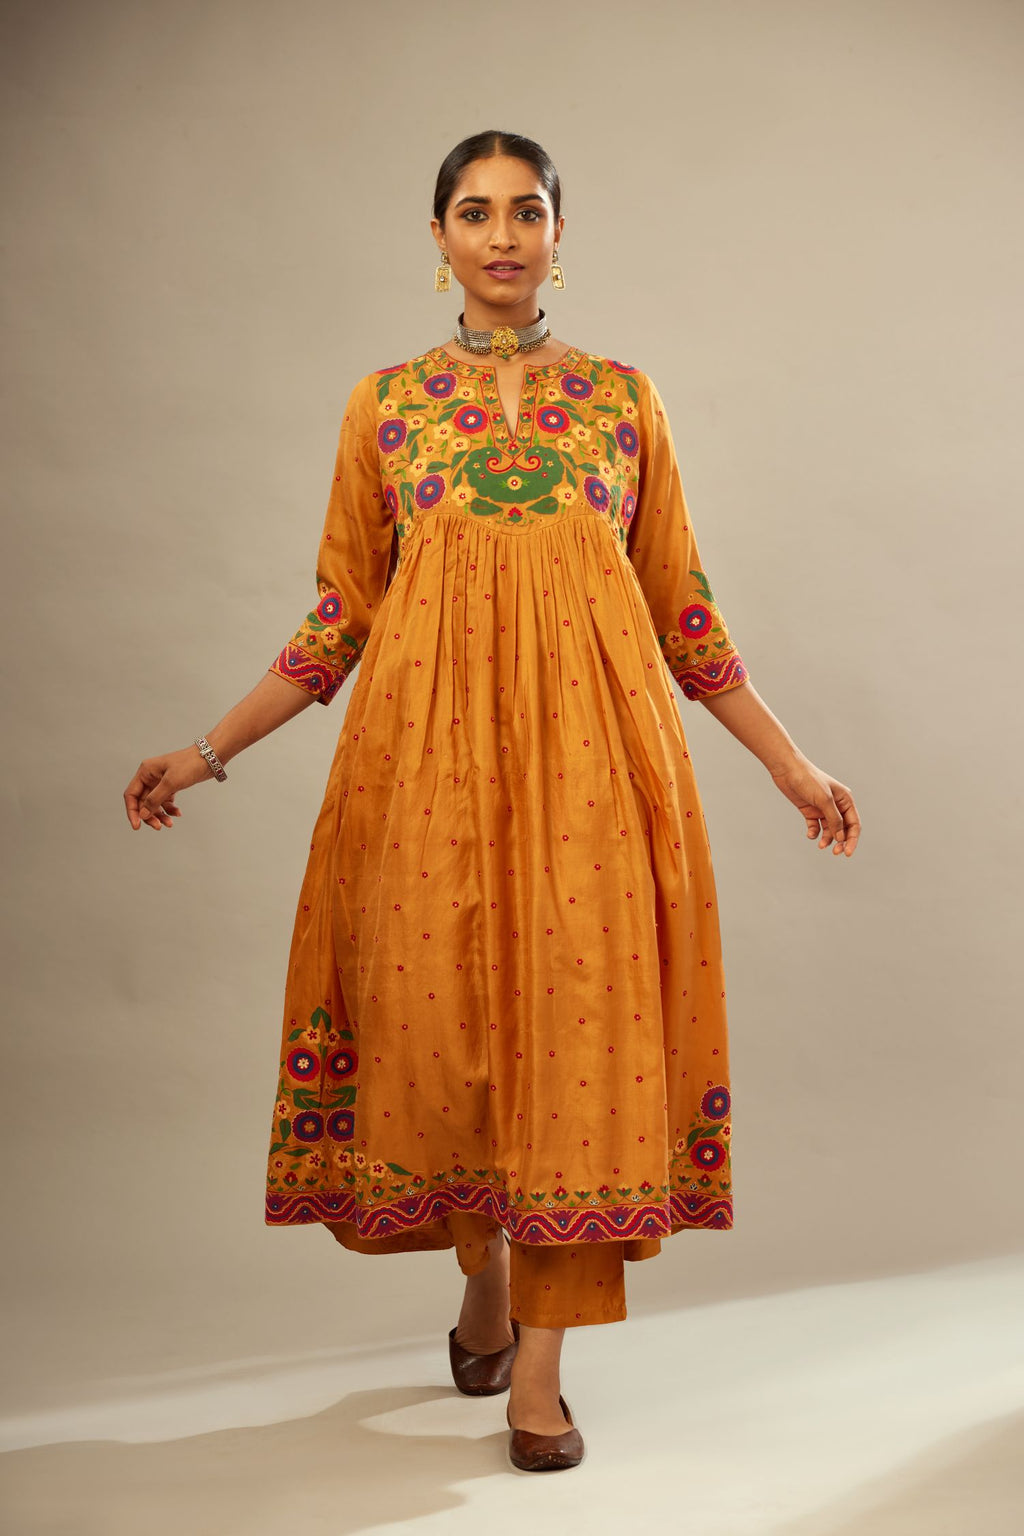 Mustard silk kurta-dress set with a wavy high-waist and fine gathers. The yoke is fully embroidered with colorful circular appliqué and aari thread work.